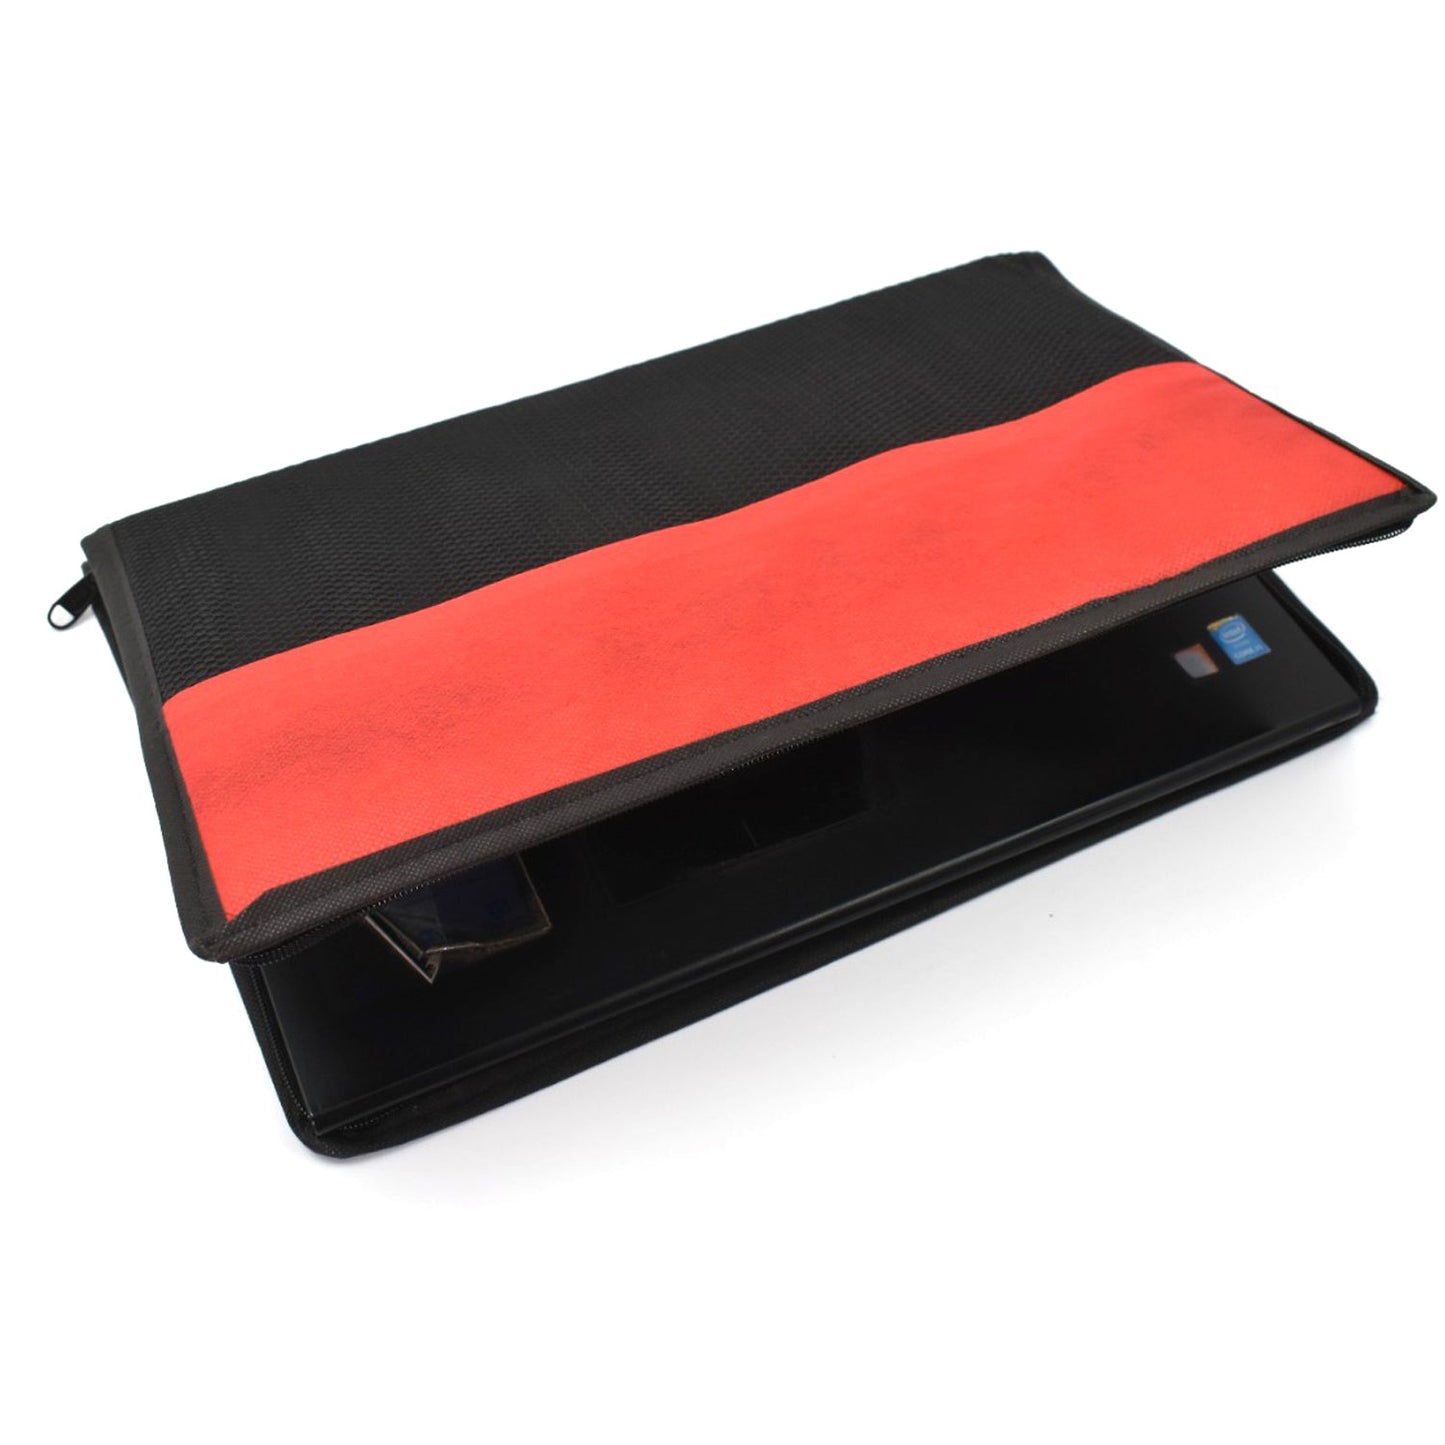 6163 Laptop Cover Bag Used As A Laptop Holder To Get Along With Laptop Anywhere Easily. 